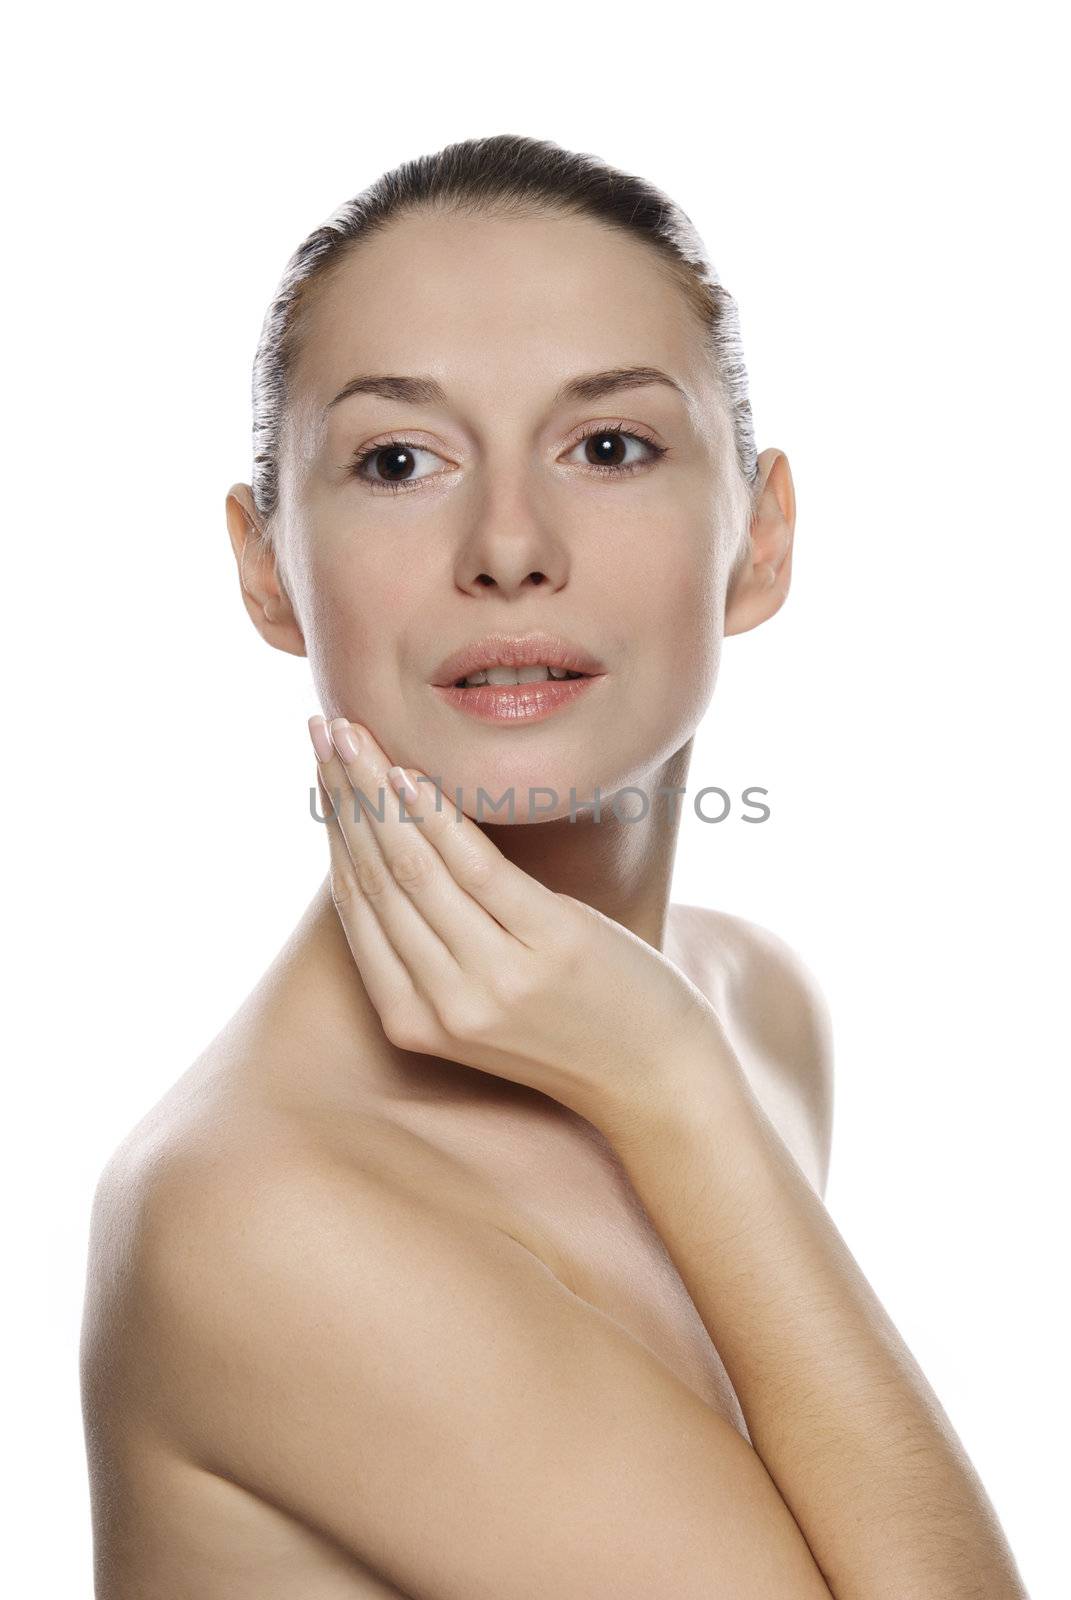 Portrait of young beautiful serene girl with healthy complexion. Isolated on white background